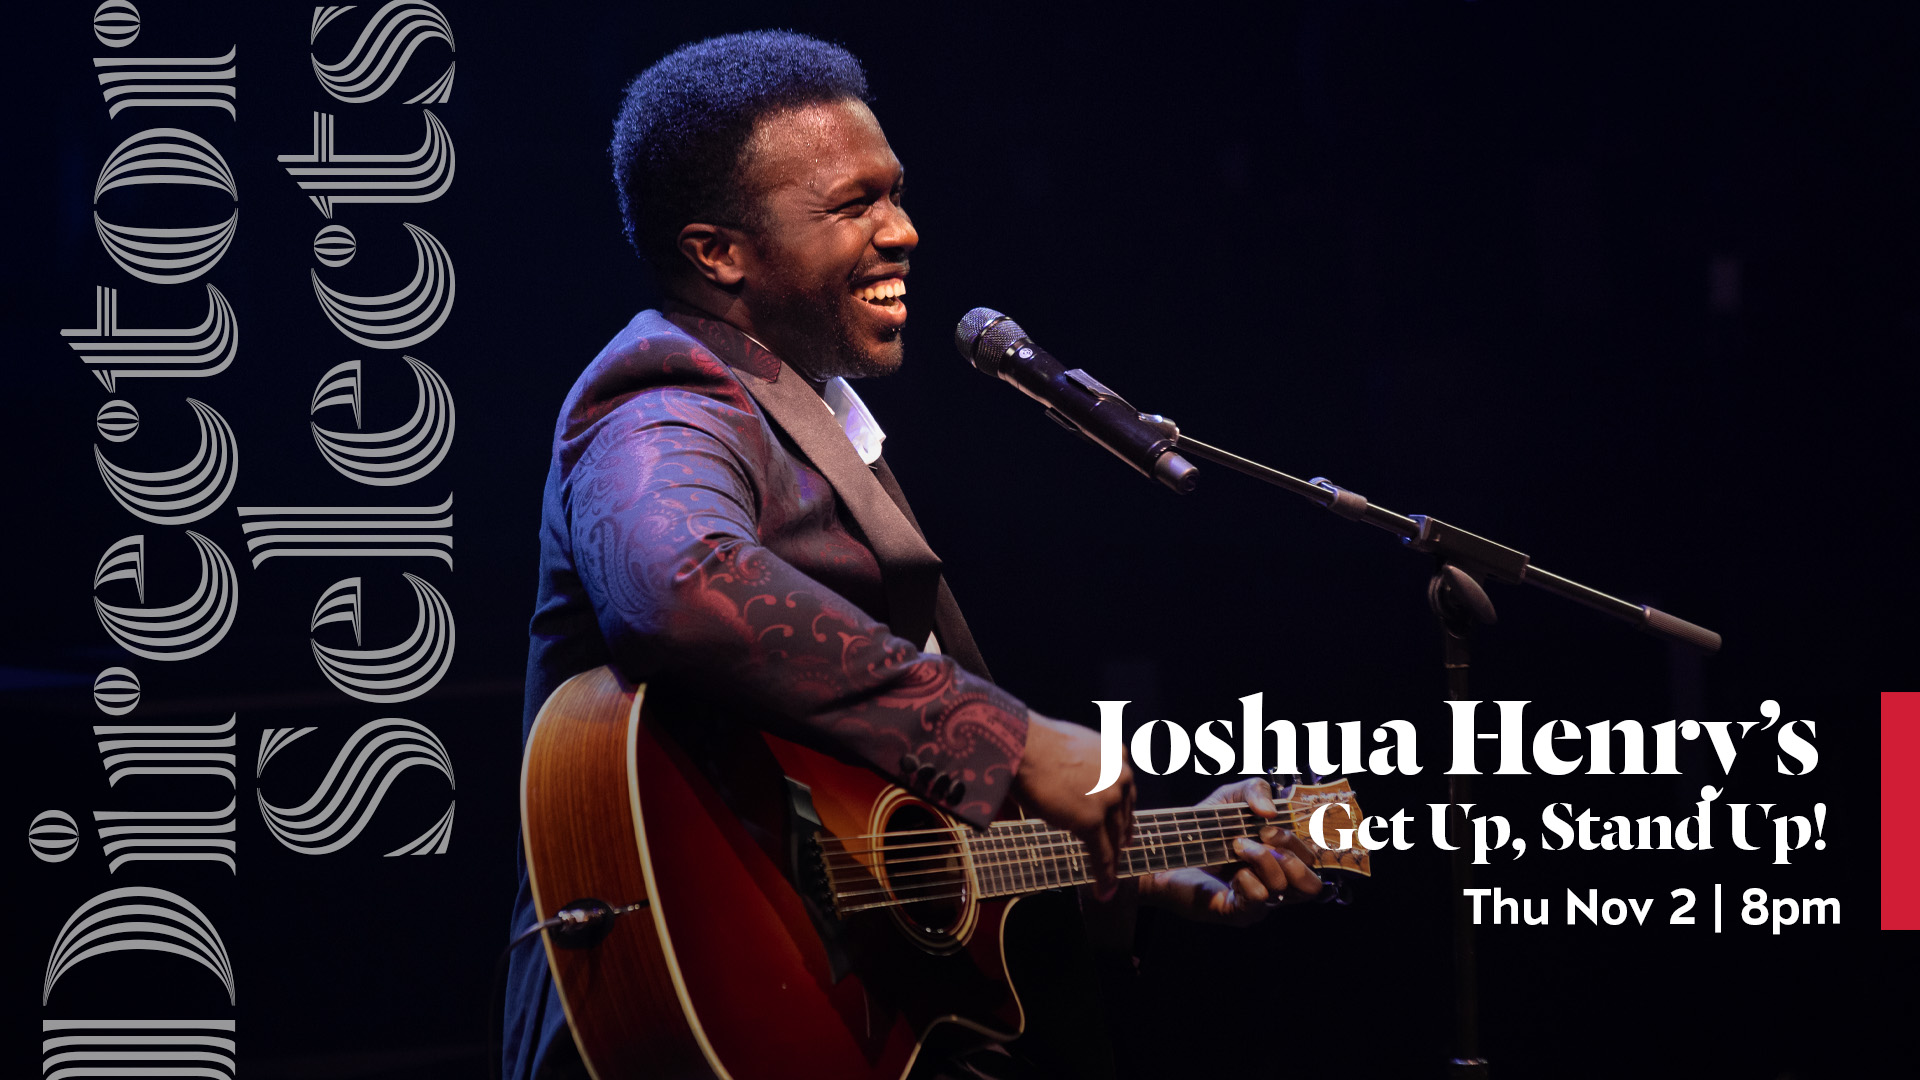 Director Selects Joshua Henry's Get Up, Stand Up! Thu Nov 2 | 8pm